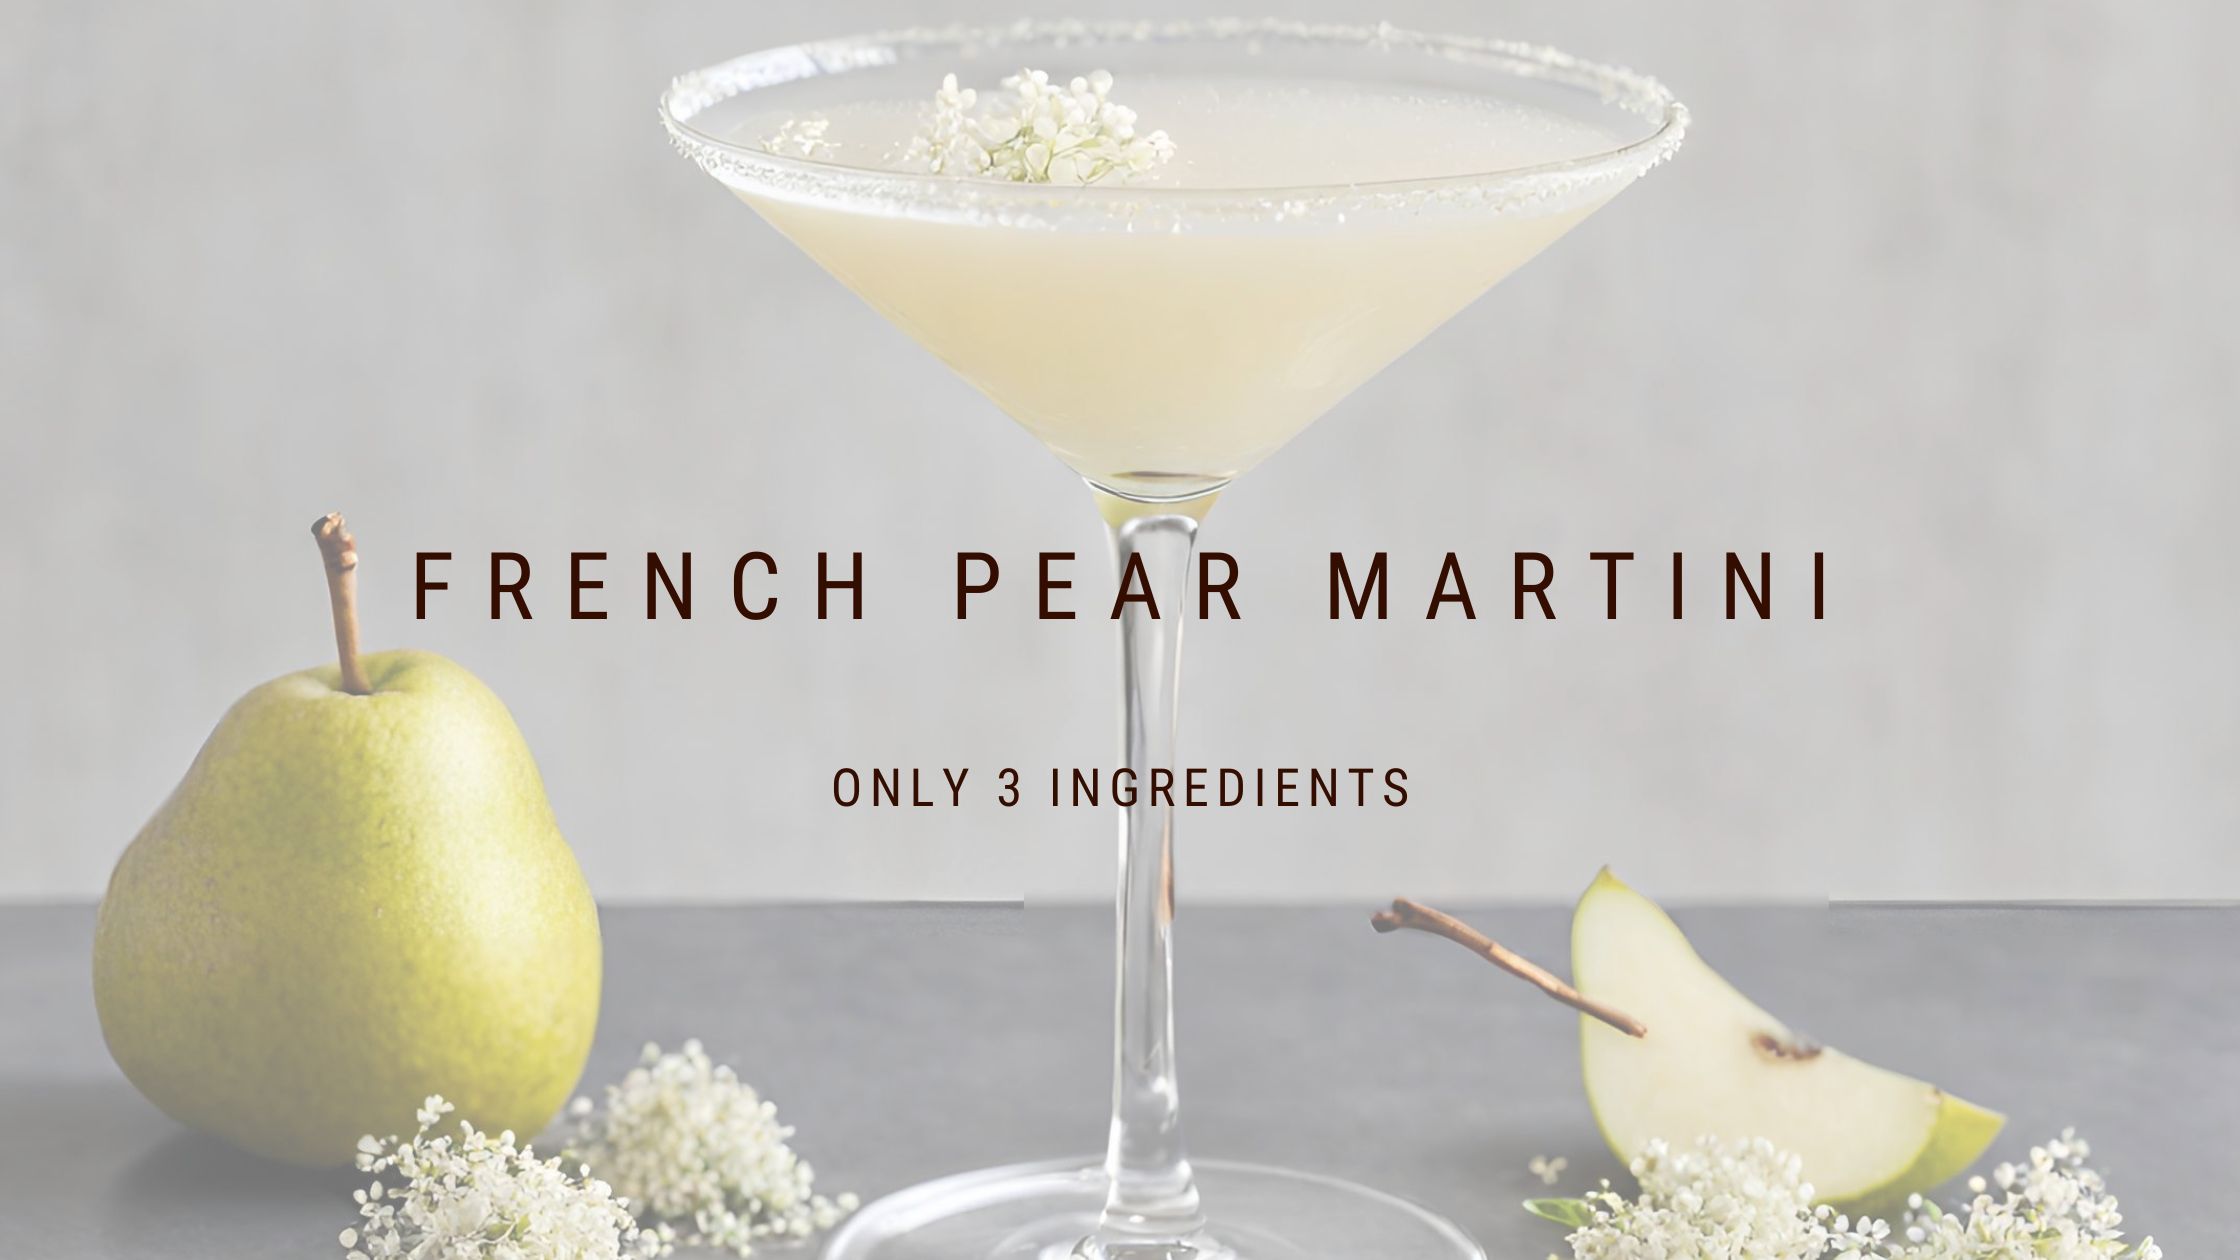 3 Ingredient French Pear Martini Recipe